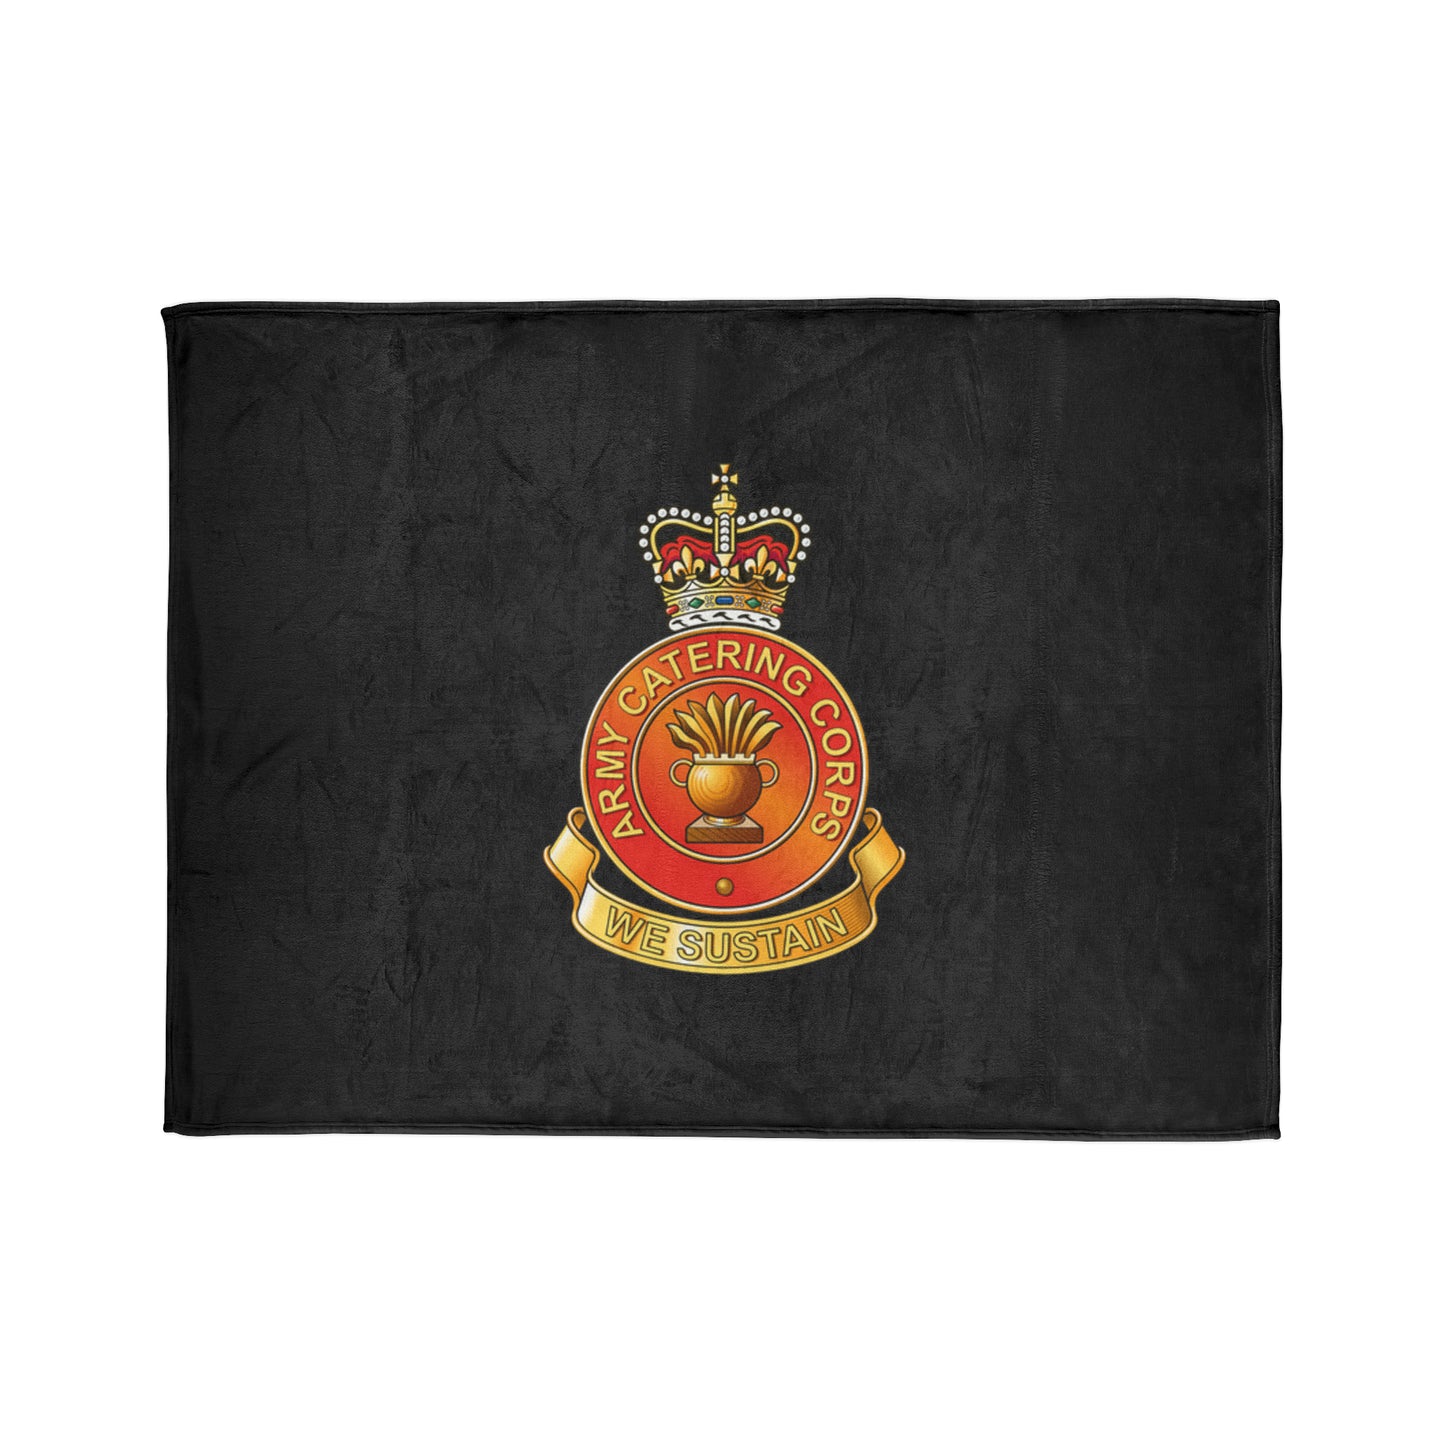 Army Catering Corps Fleece Blanket (Black Background)